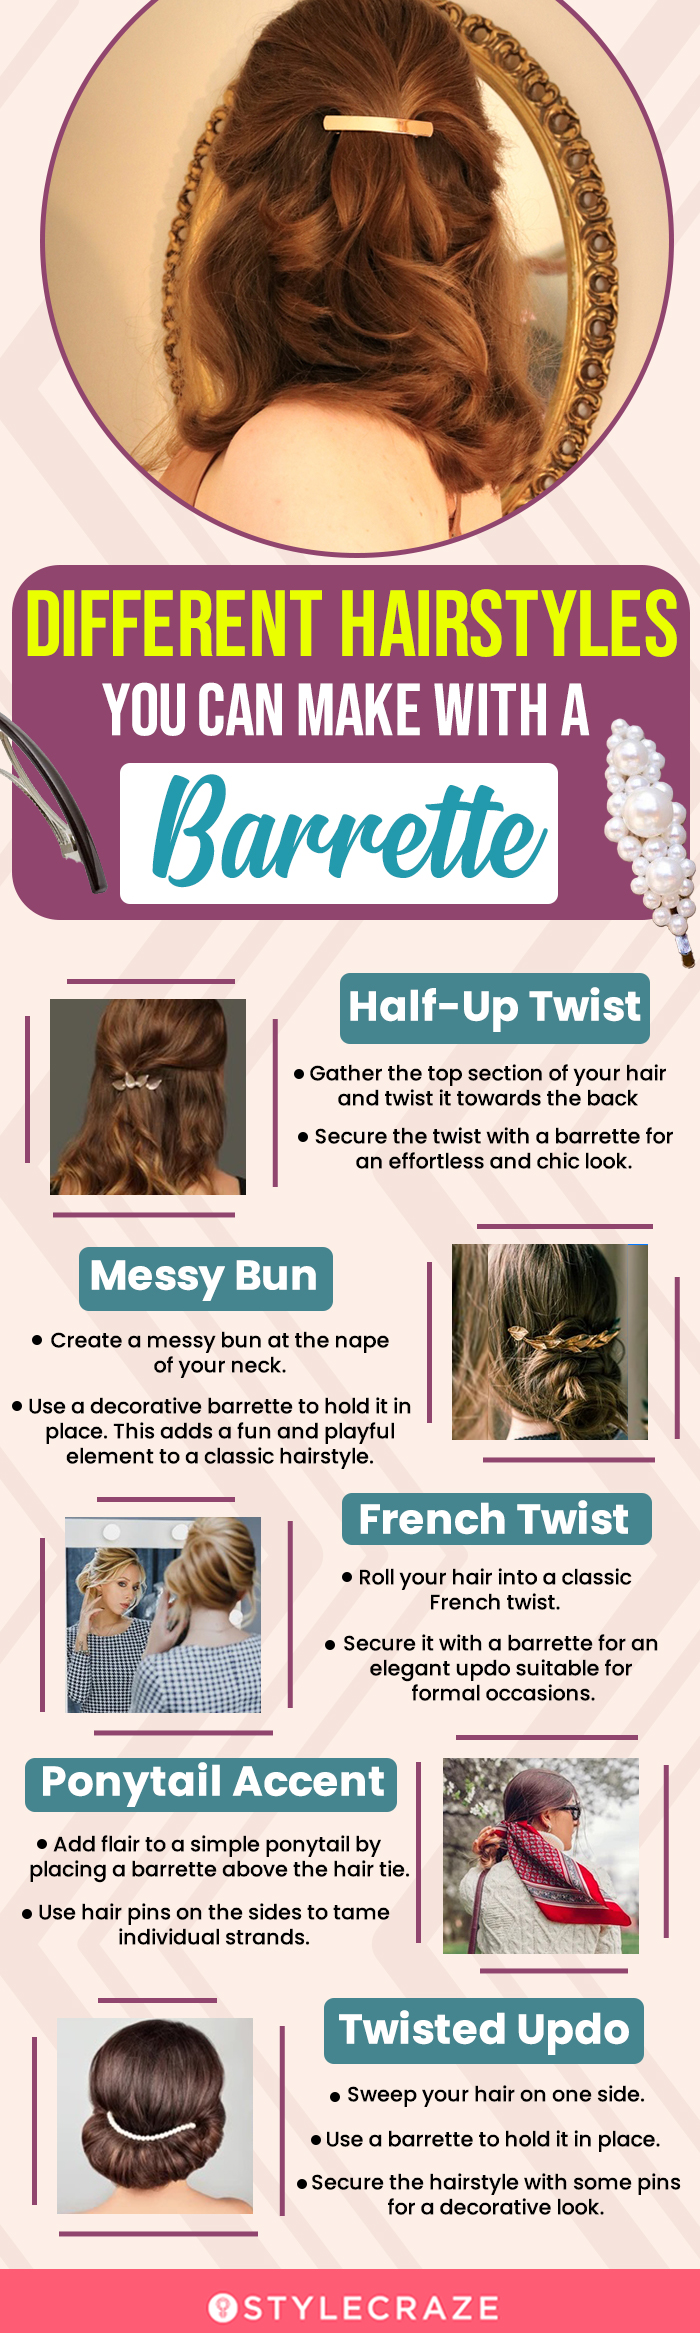 Different Hairstyles You Can Make With A Barrett (infographic)